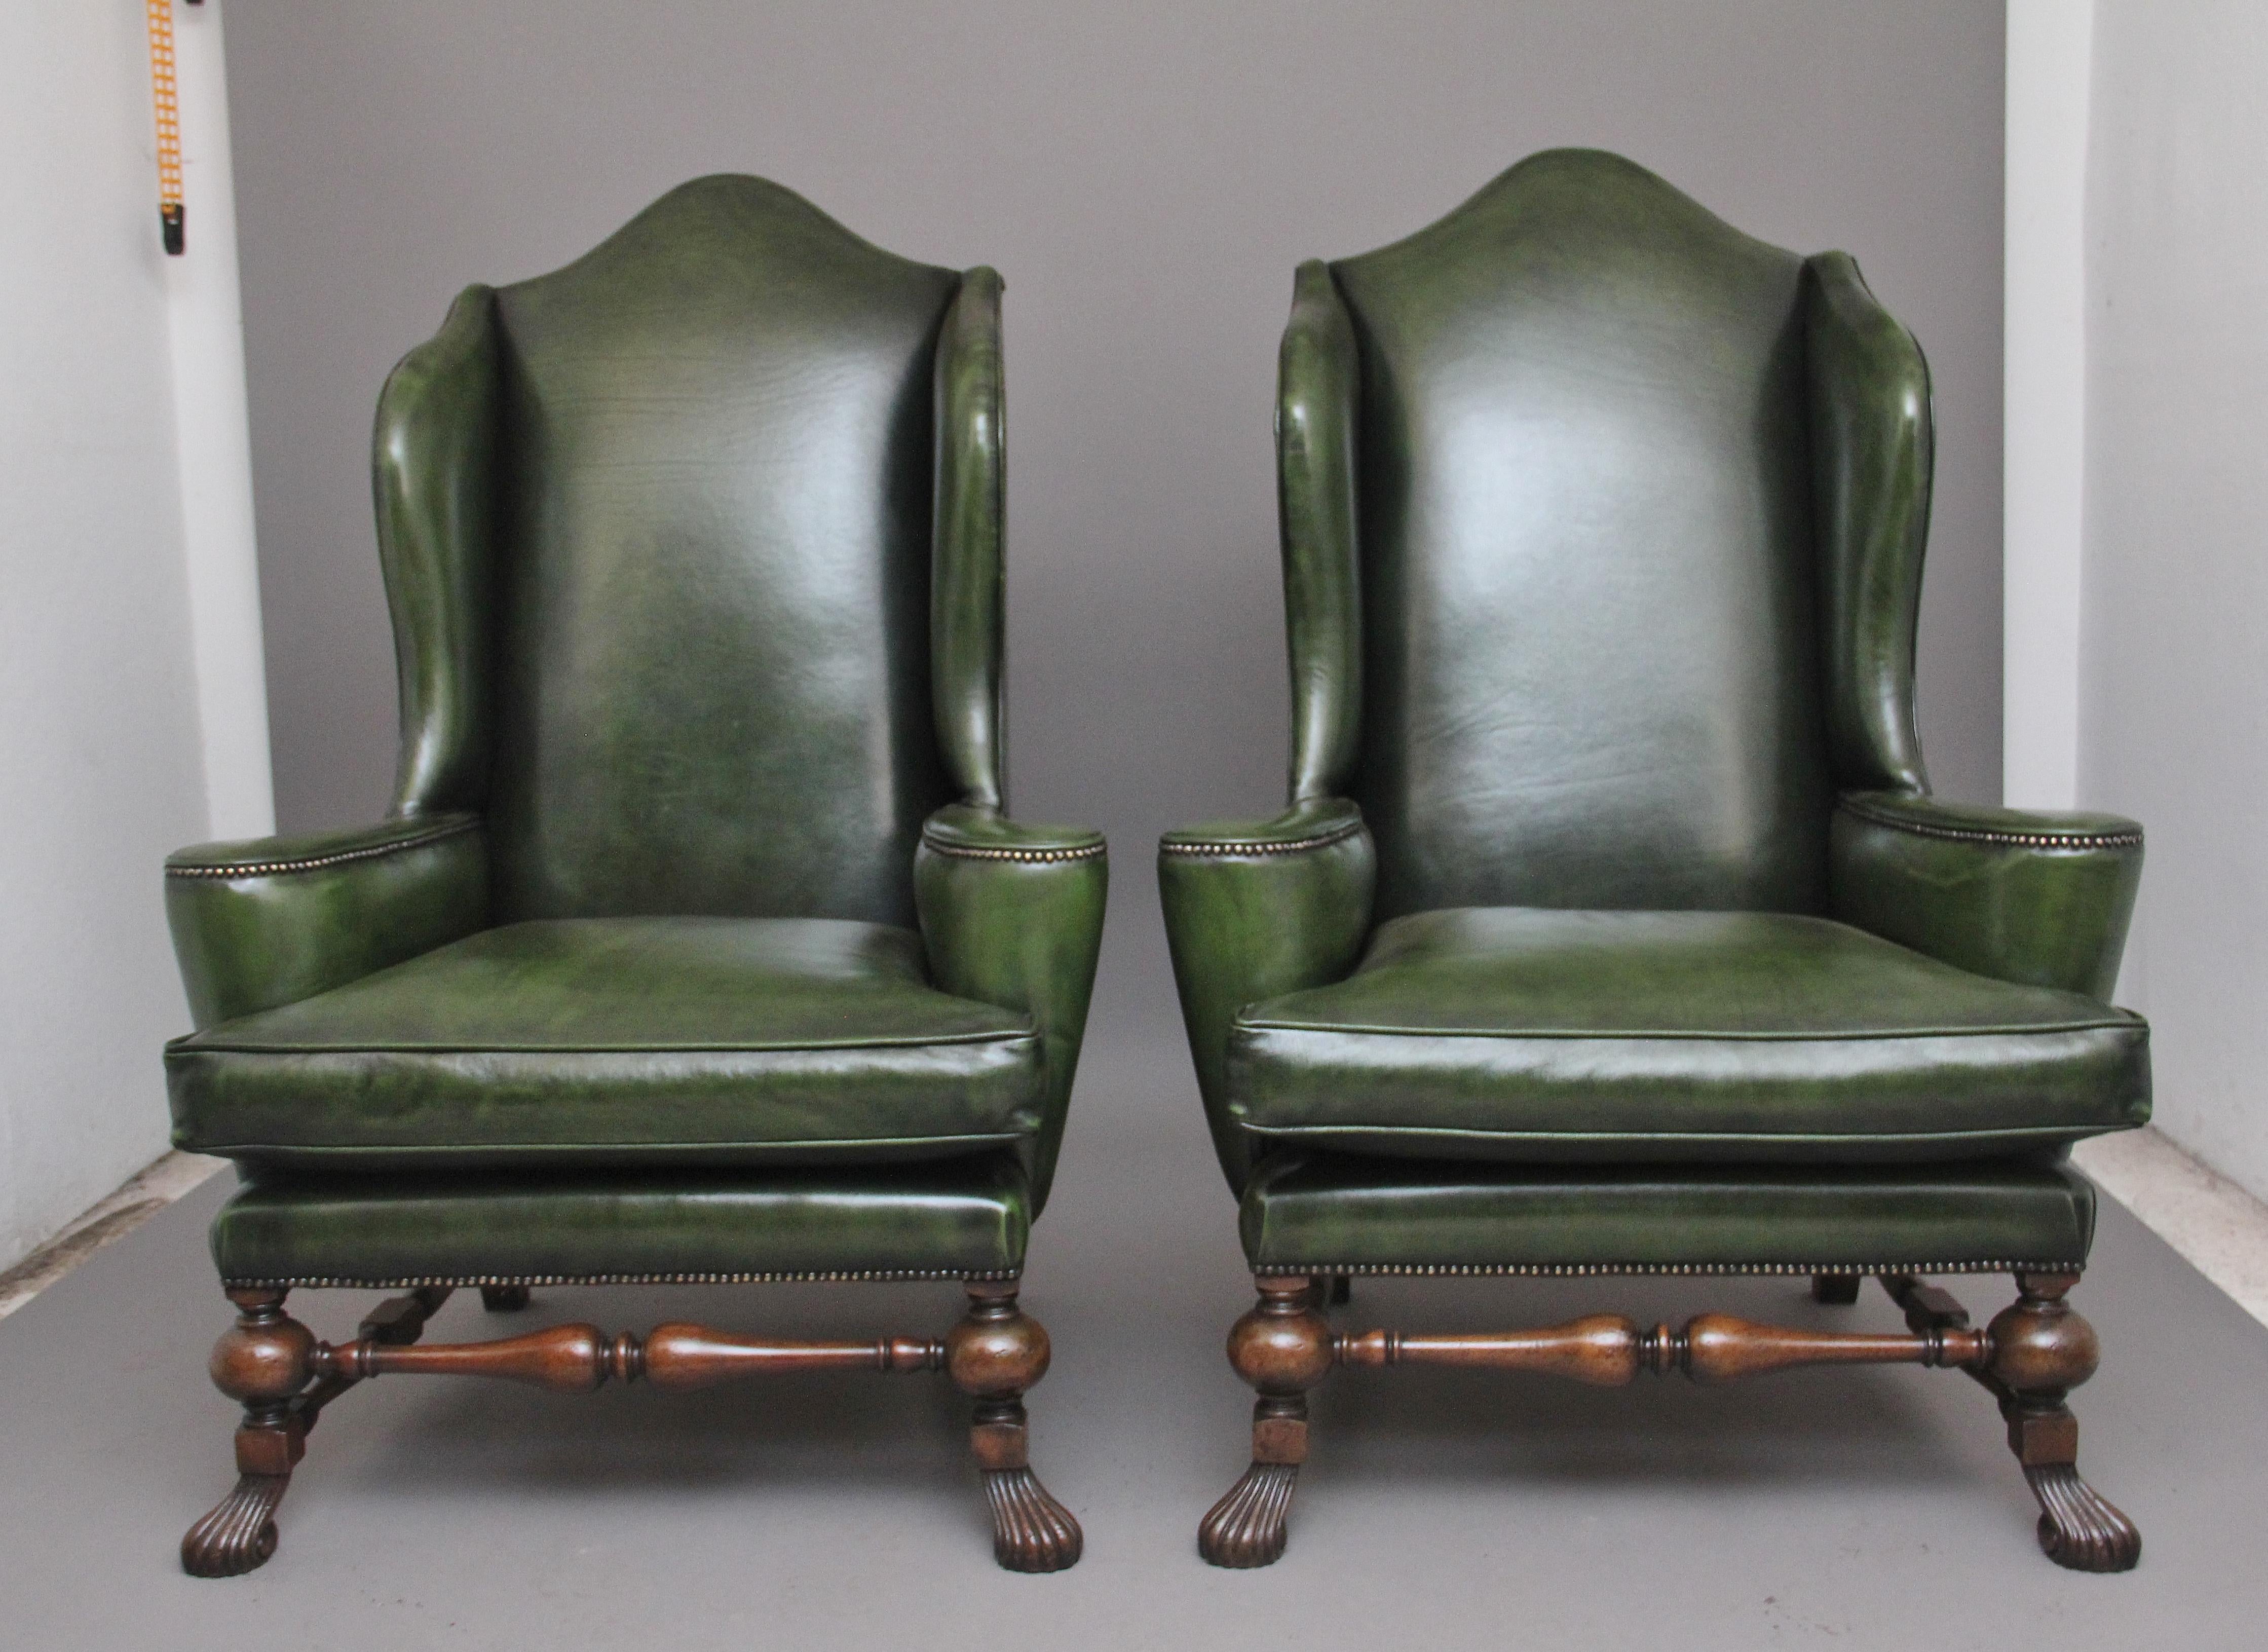 A fabulous pair of large early 19th Century walnut wingback armchairs in the Georgian style, just been reupholstered in a green leather with brass stud decoration, having a shaped high back with winged sides coming down to the curved arm supports,